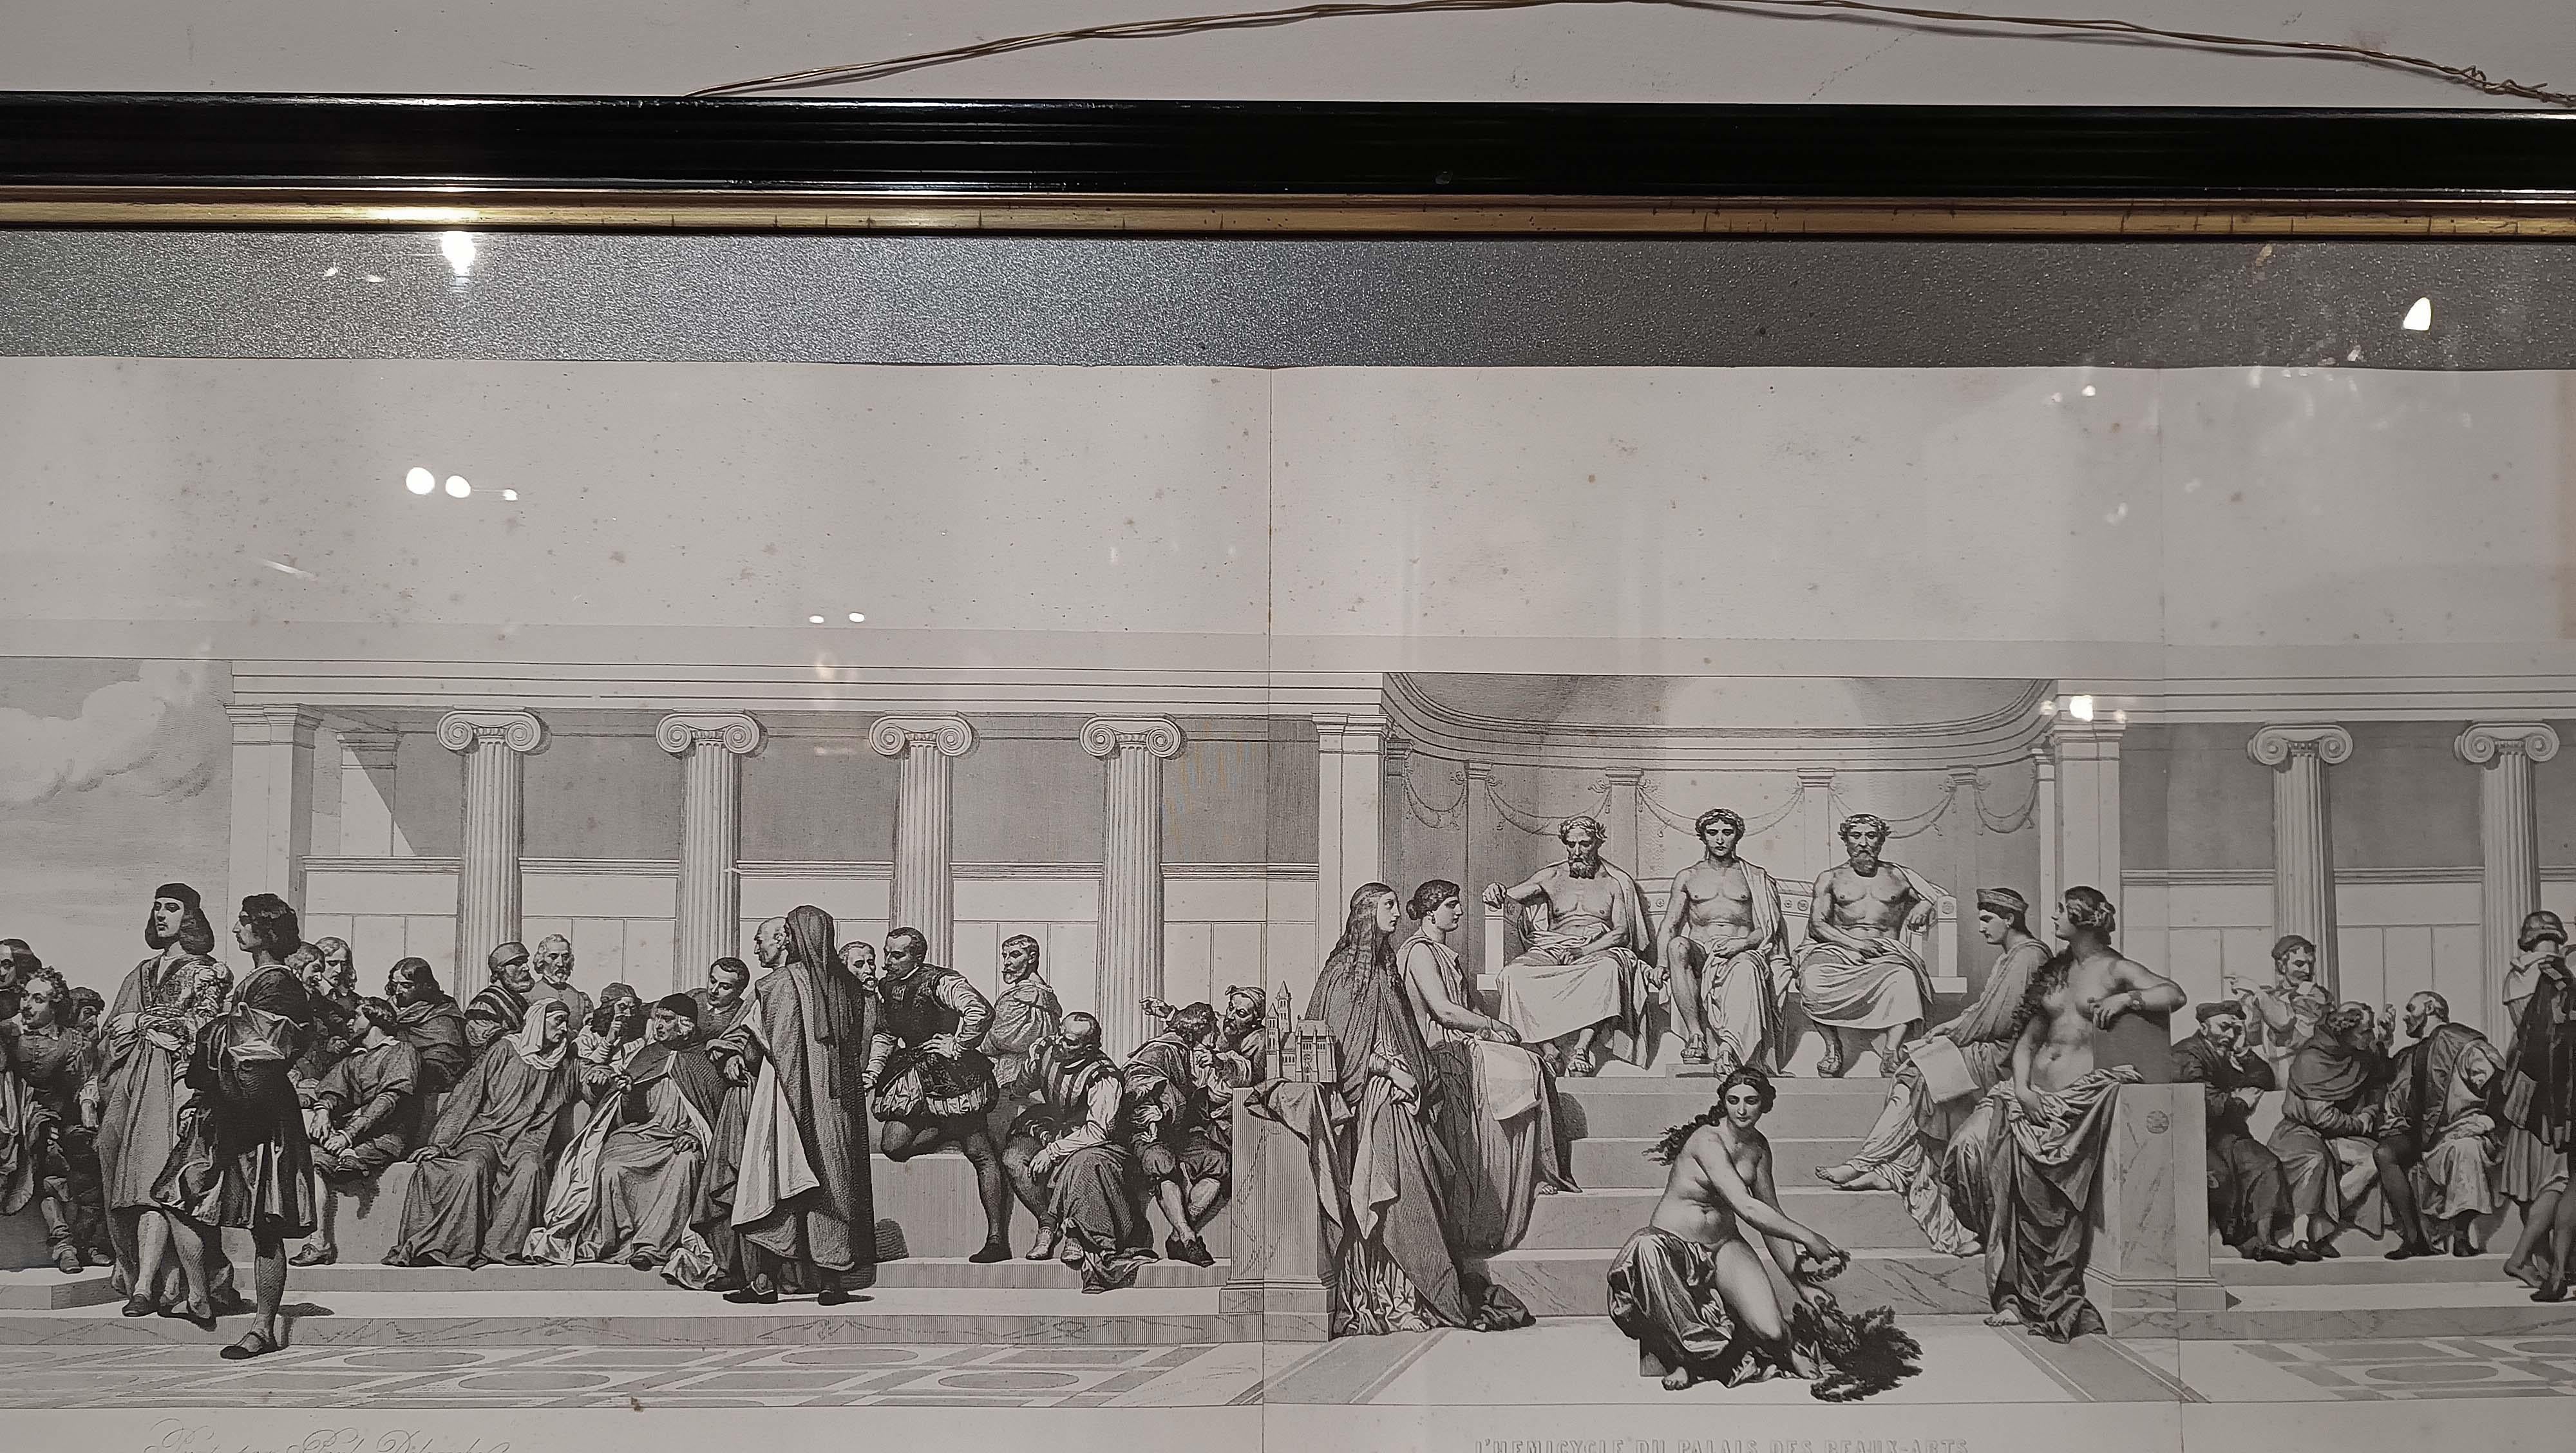 EARLY 19th CENTURY LITHOGRAPH BY HENRIQUEL-DUPONT DEPICTING 